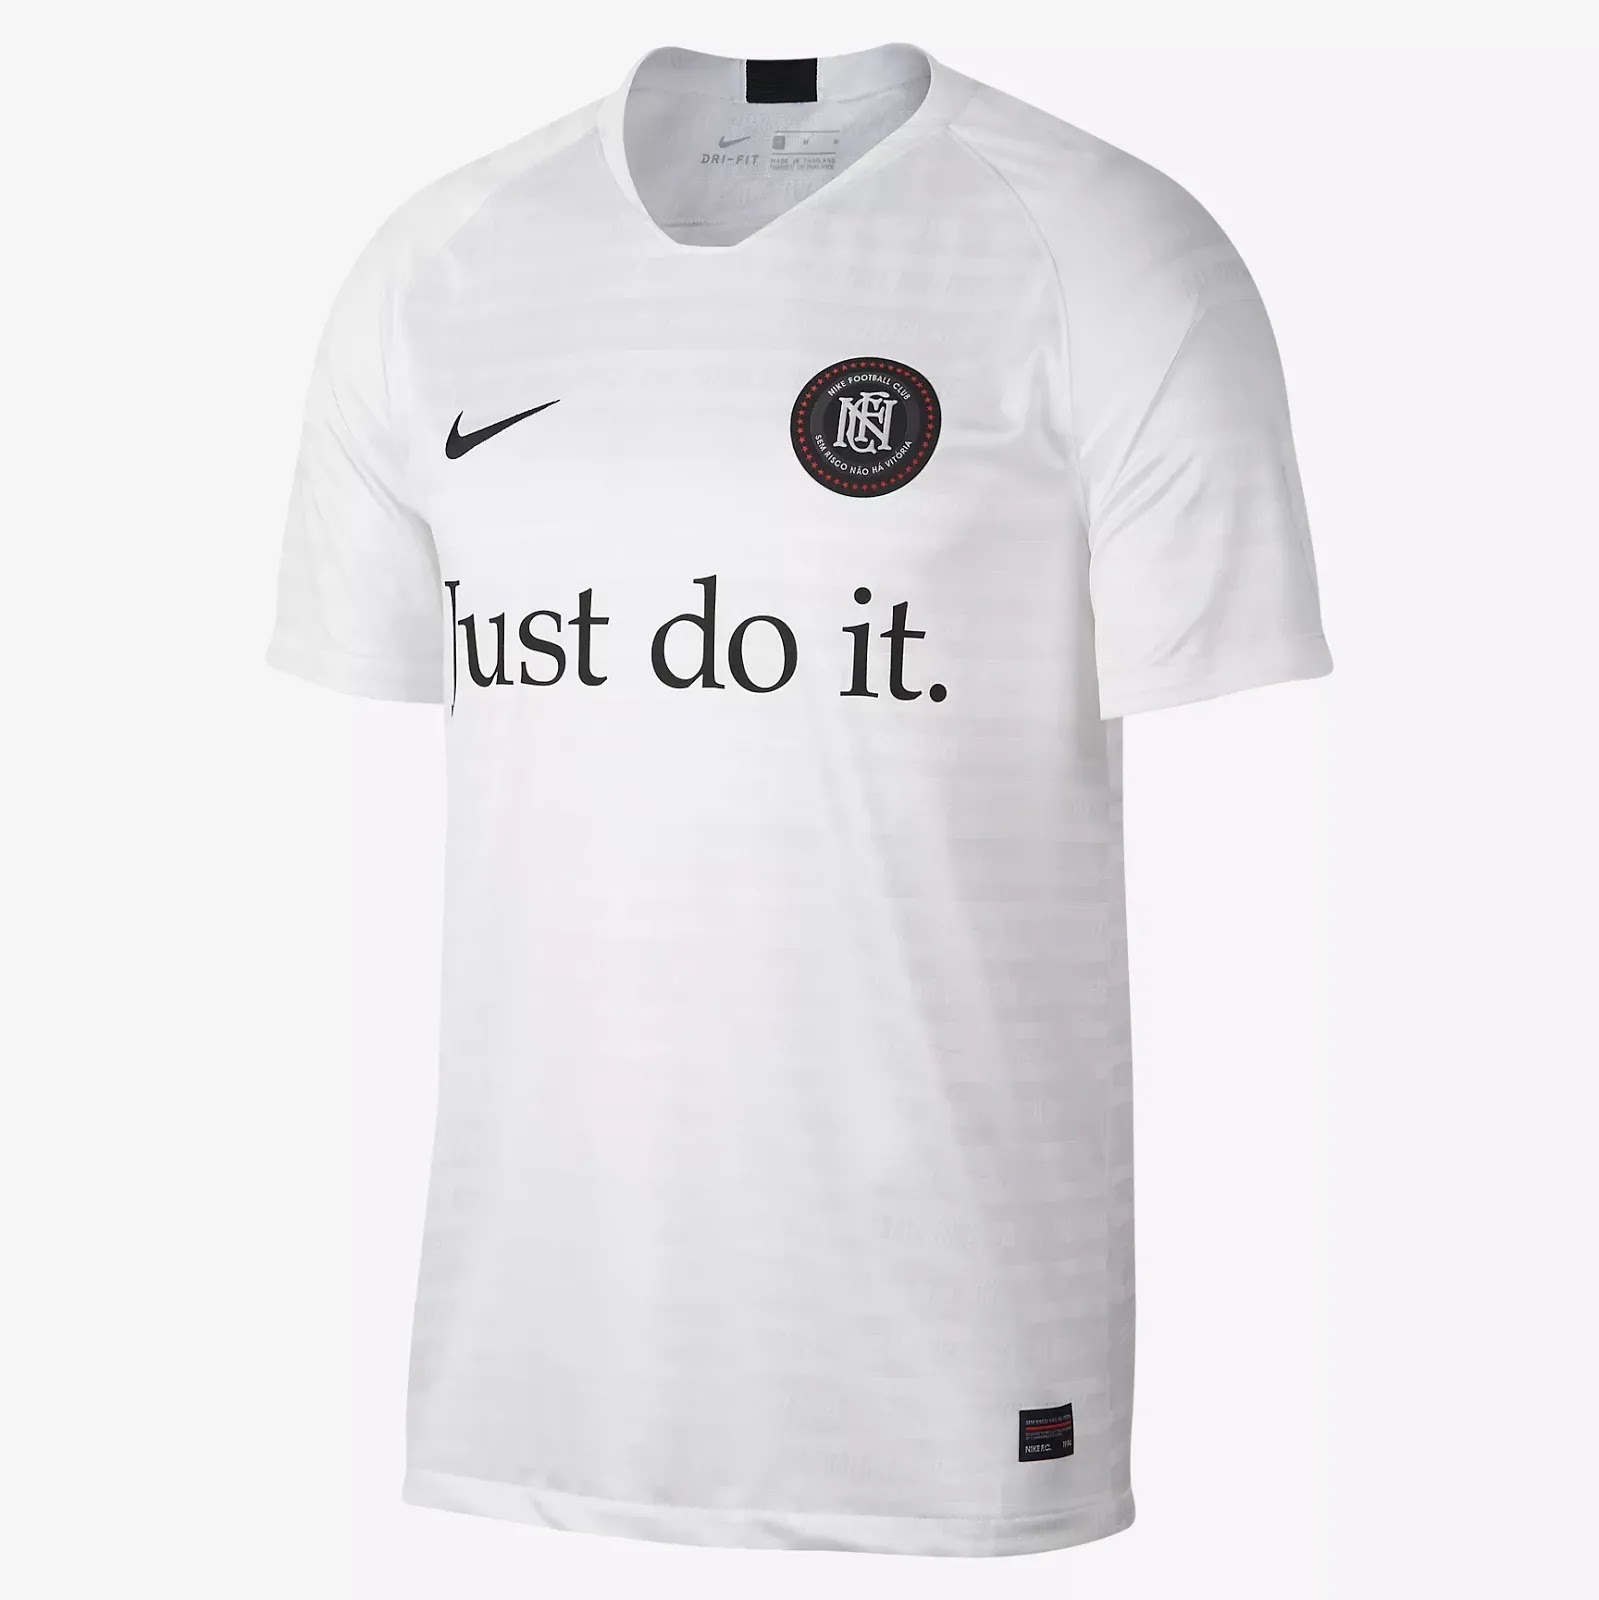 Stunning Nike F.C. 2018-2019 Collection Released - Footy Headlines